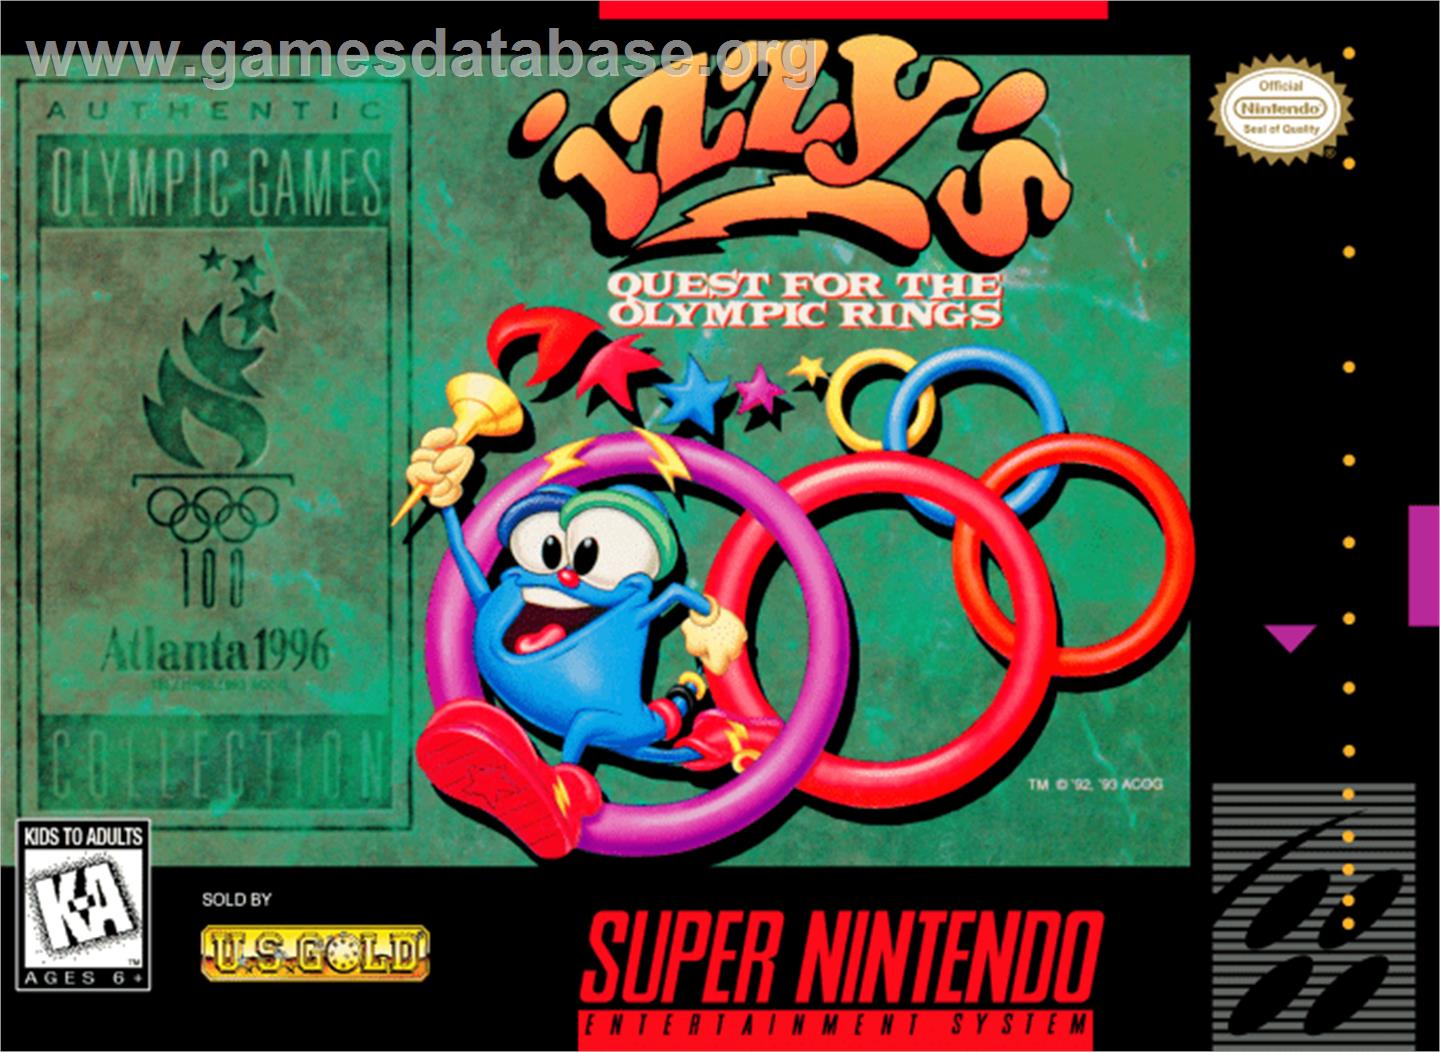 Izzy's Quest for the Olympic Rings - Nintendo SNES - Artwork - Box